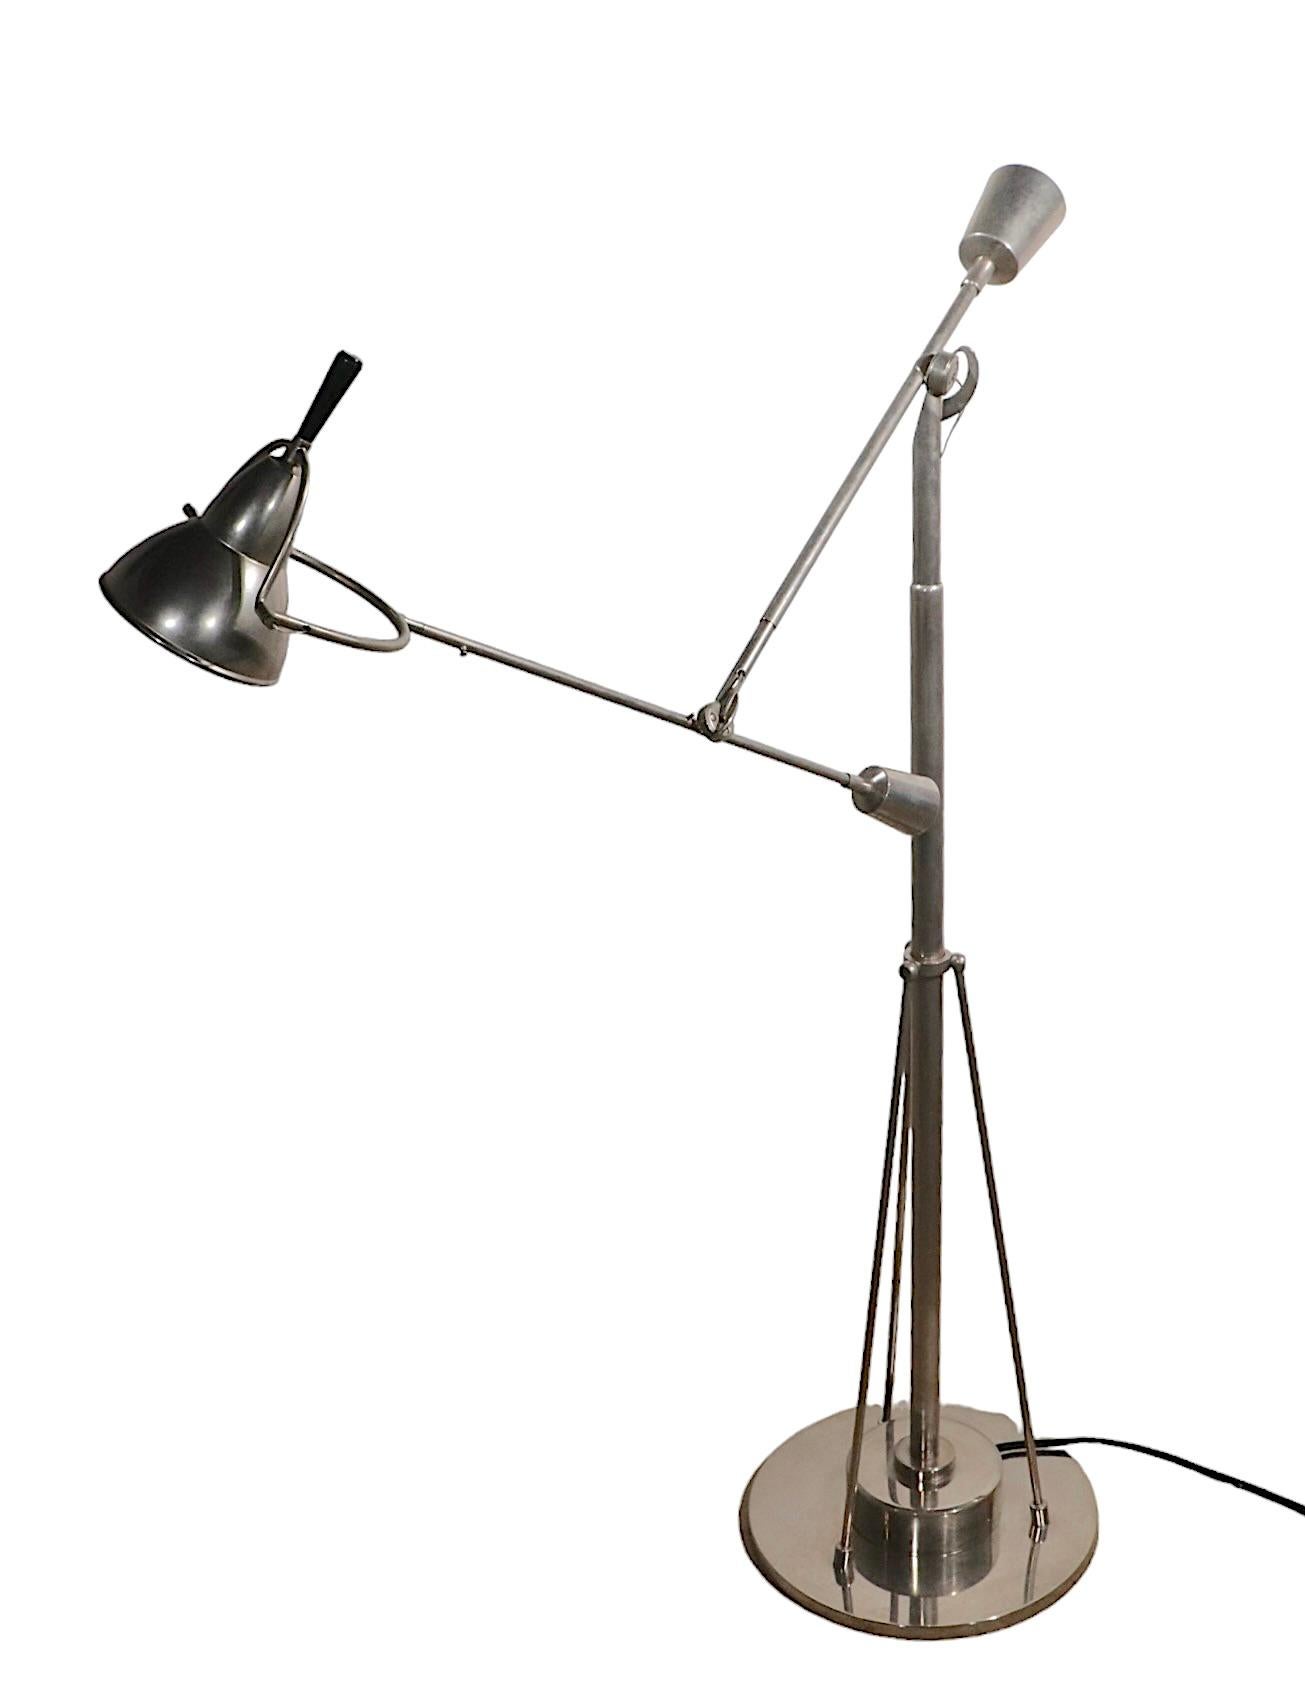 American Angle Poise Floor Lamp After Buquet EB 27 For Sale